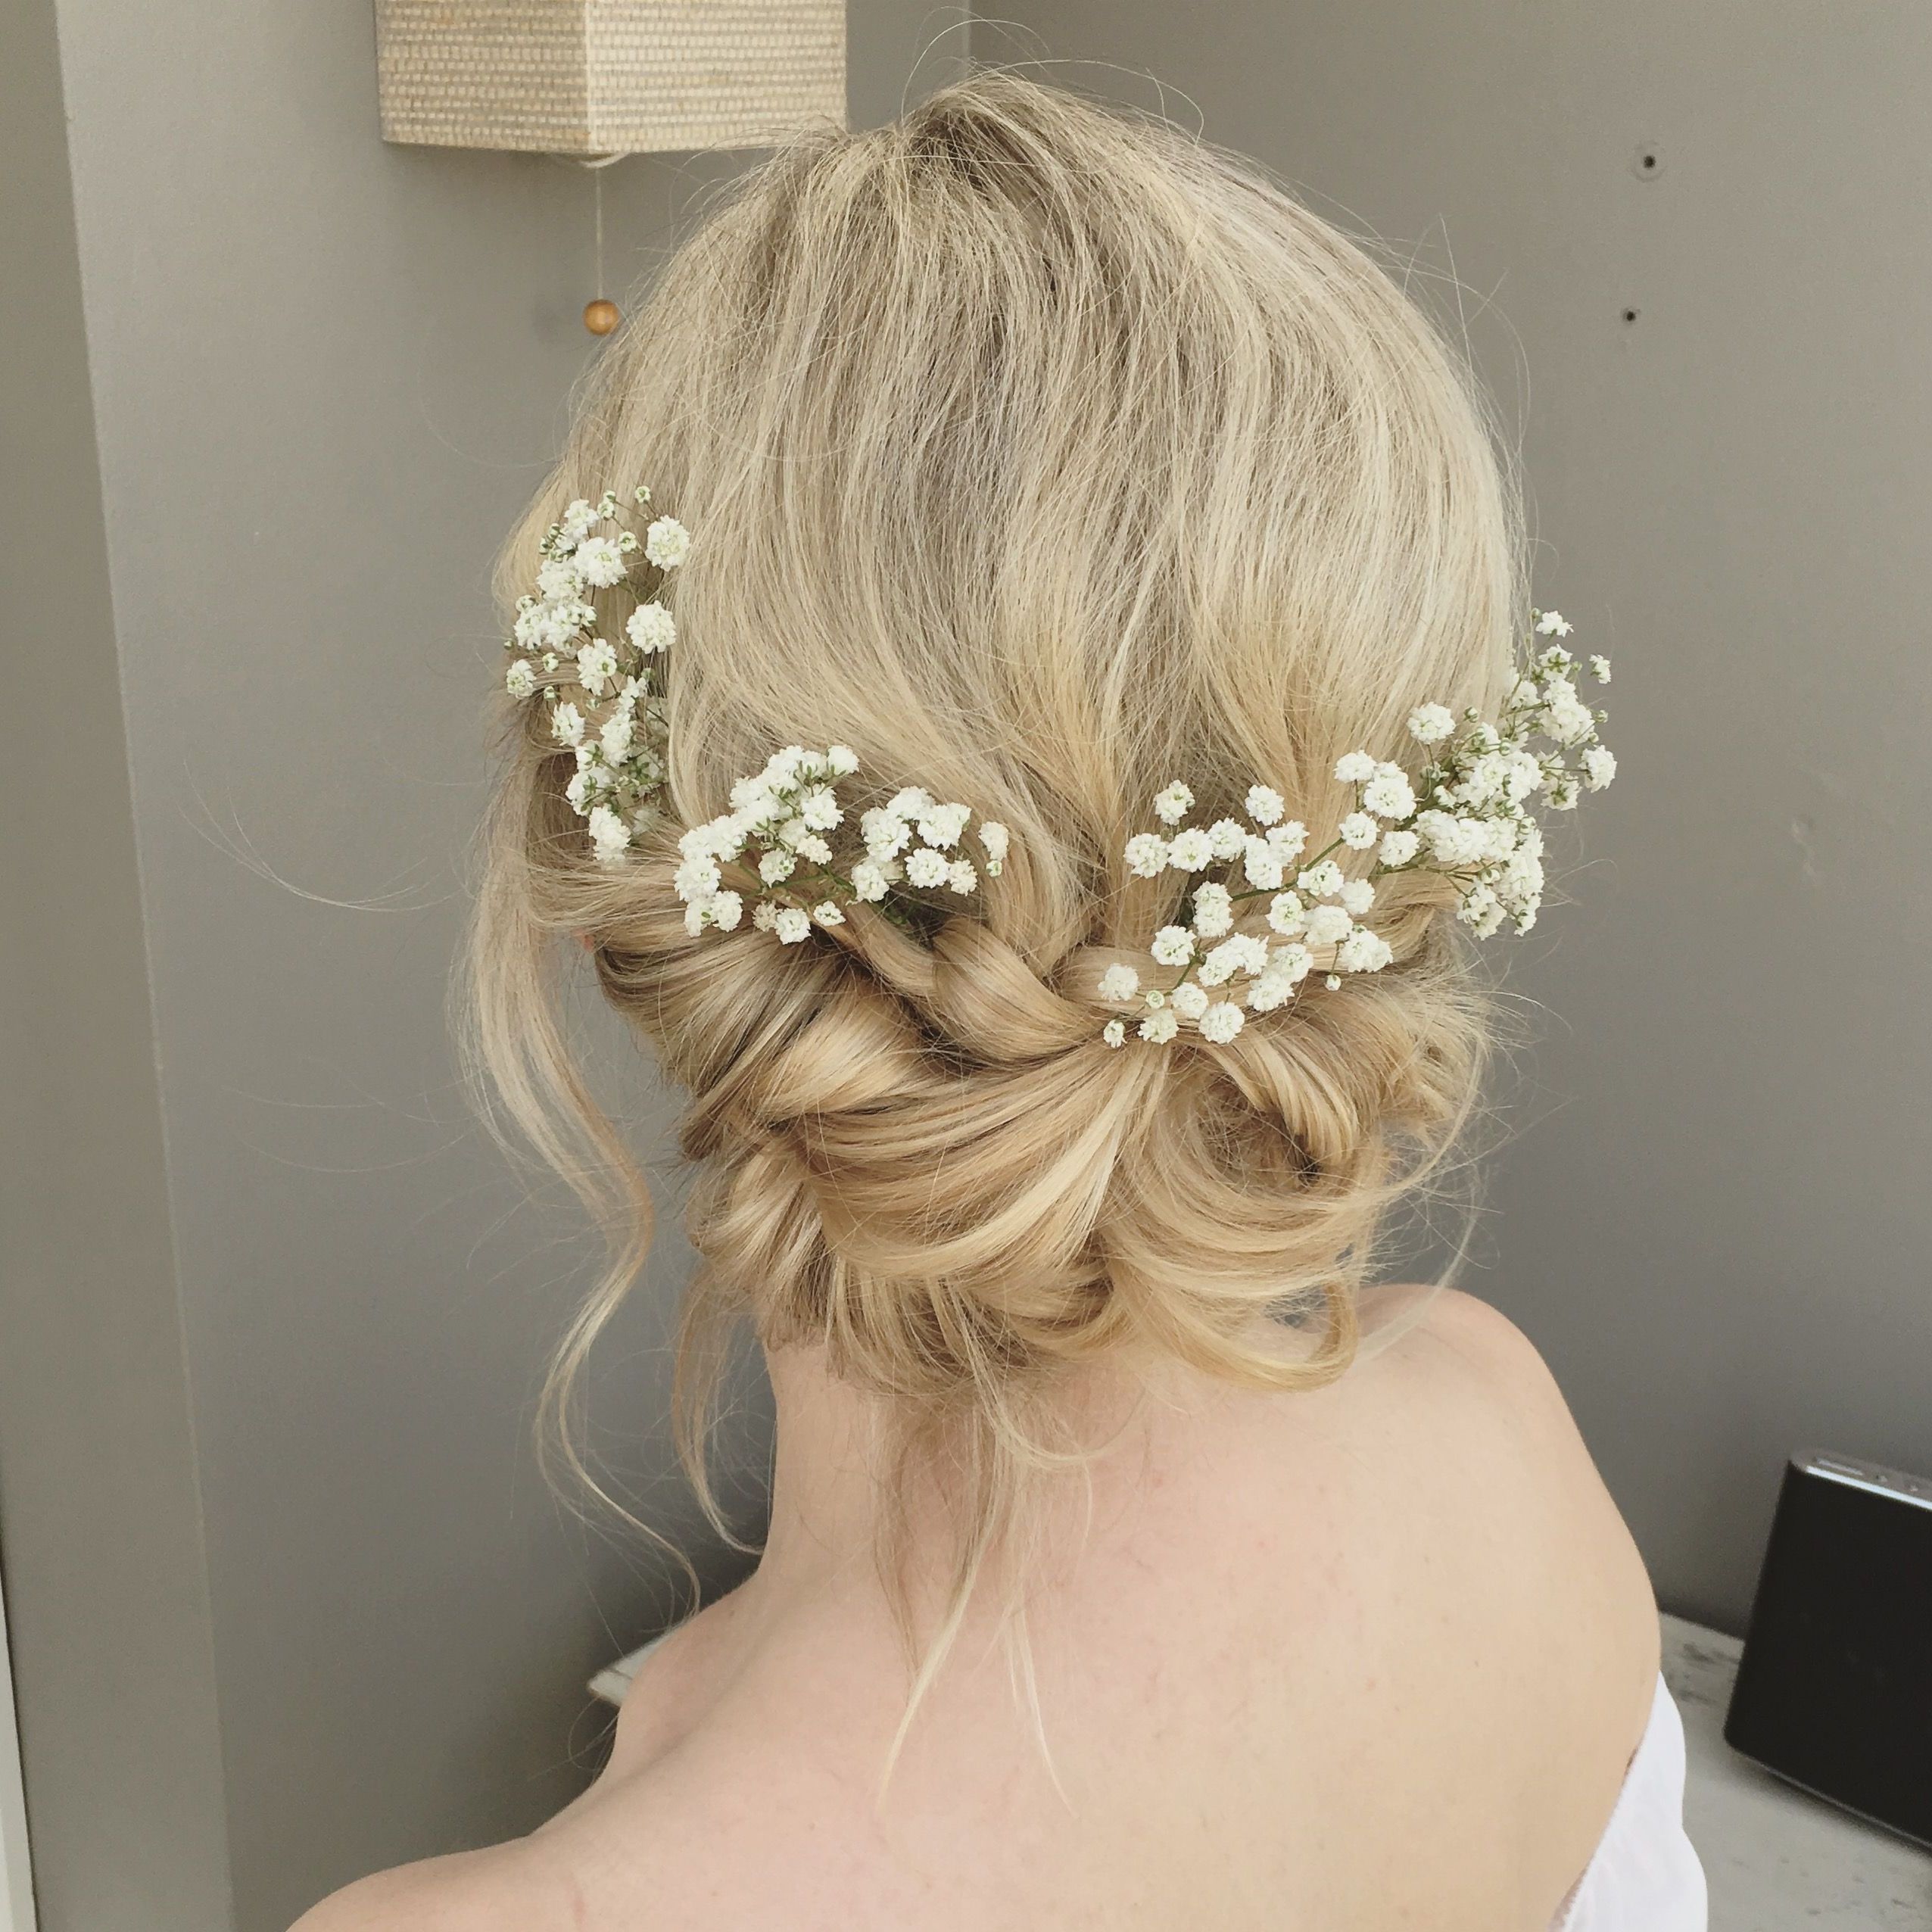 Boho Messy And Relaxed Wedding Hair With Gypsophila And Plaits Woven Intended For Current French Twist Wedding Updos With Babys Breath (View 3 of 20)